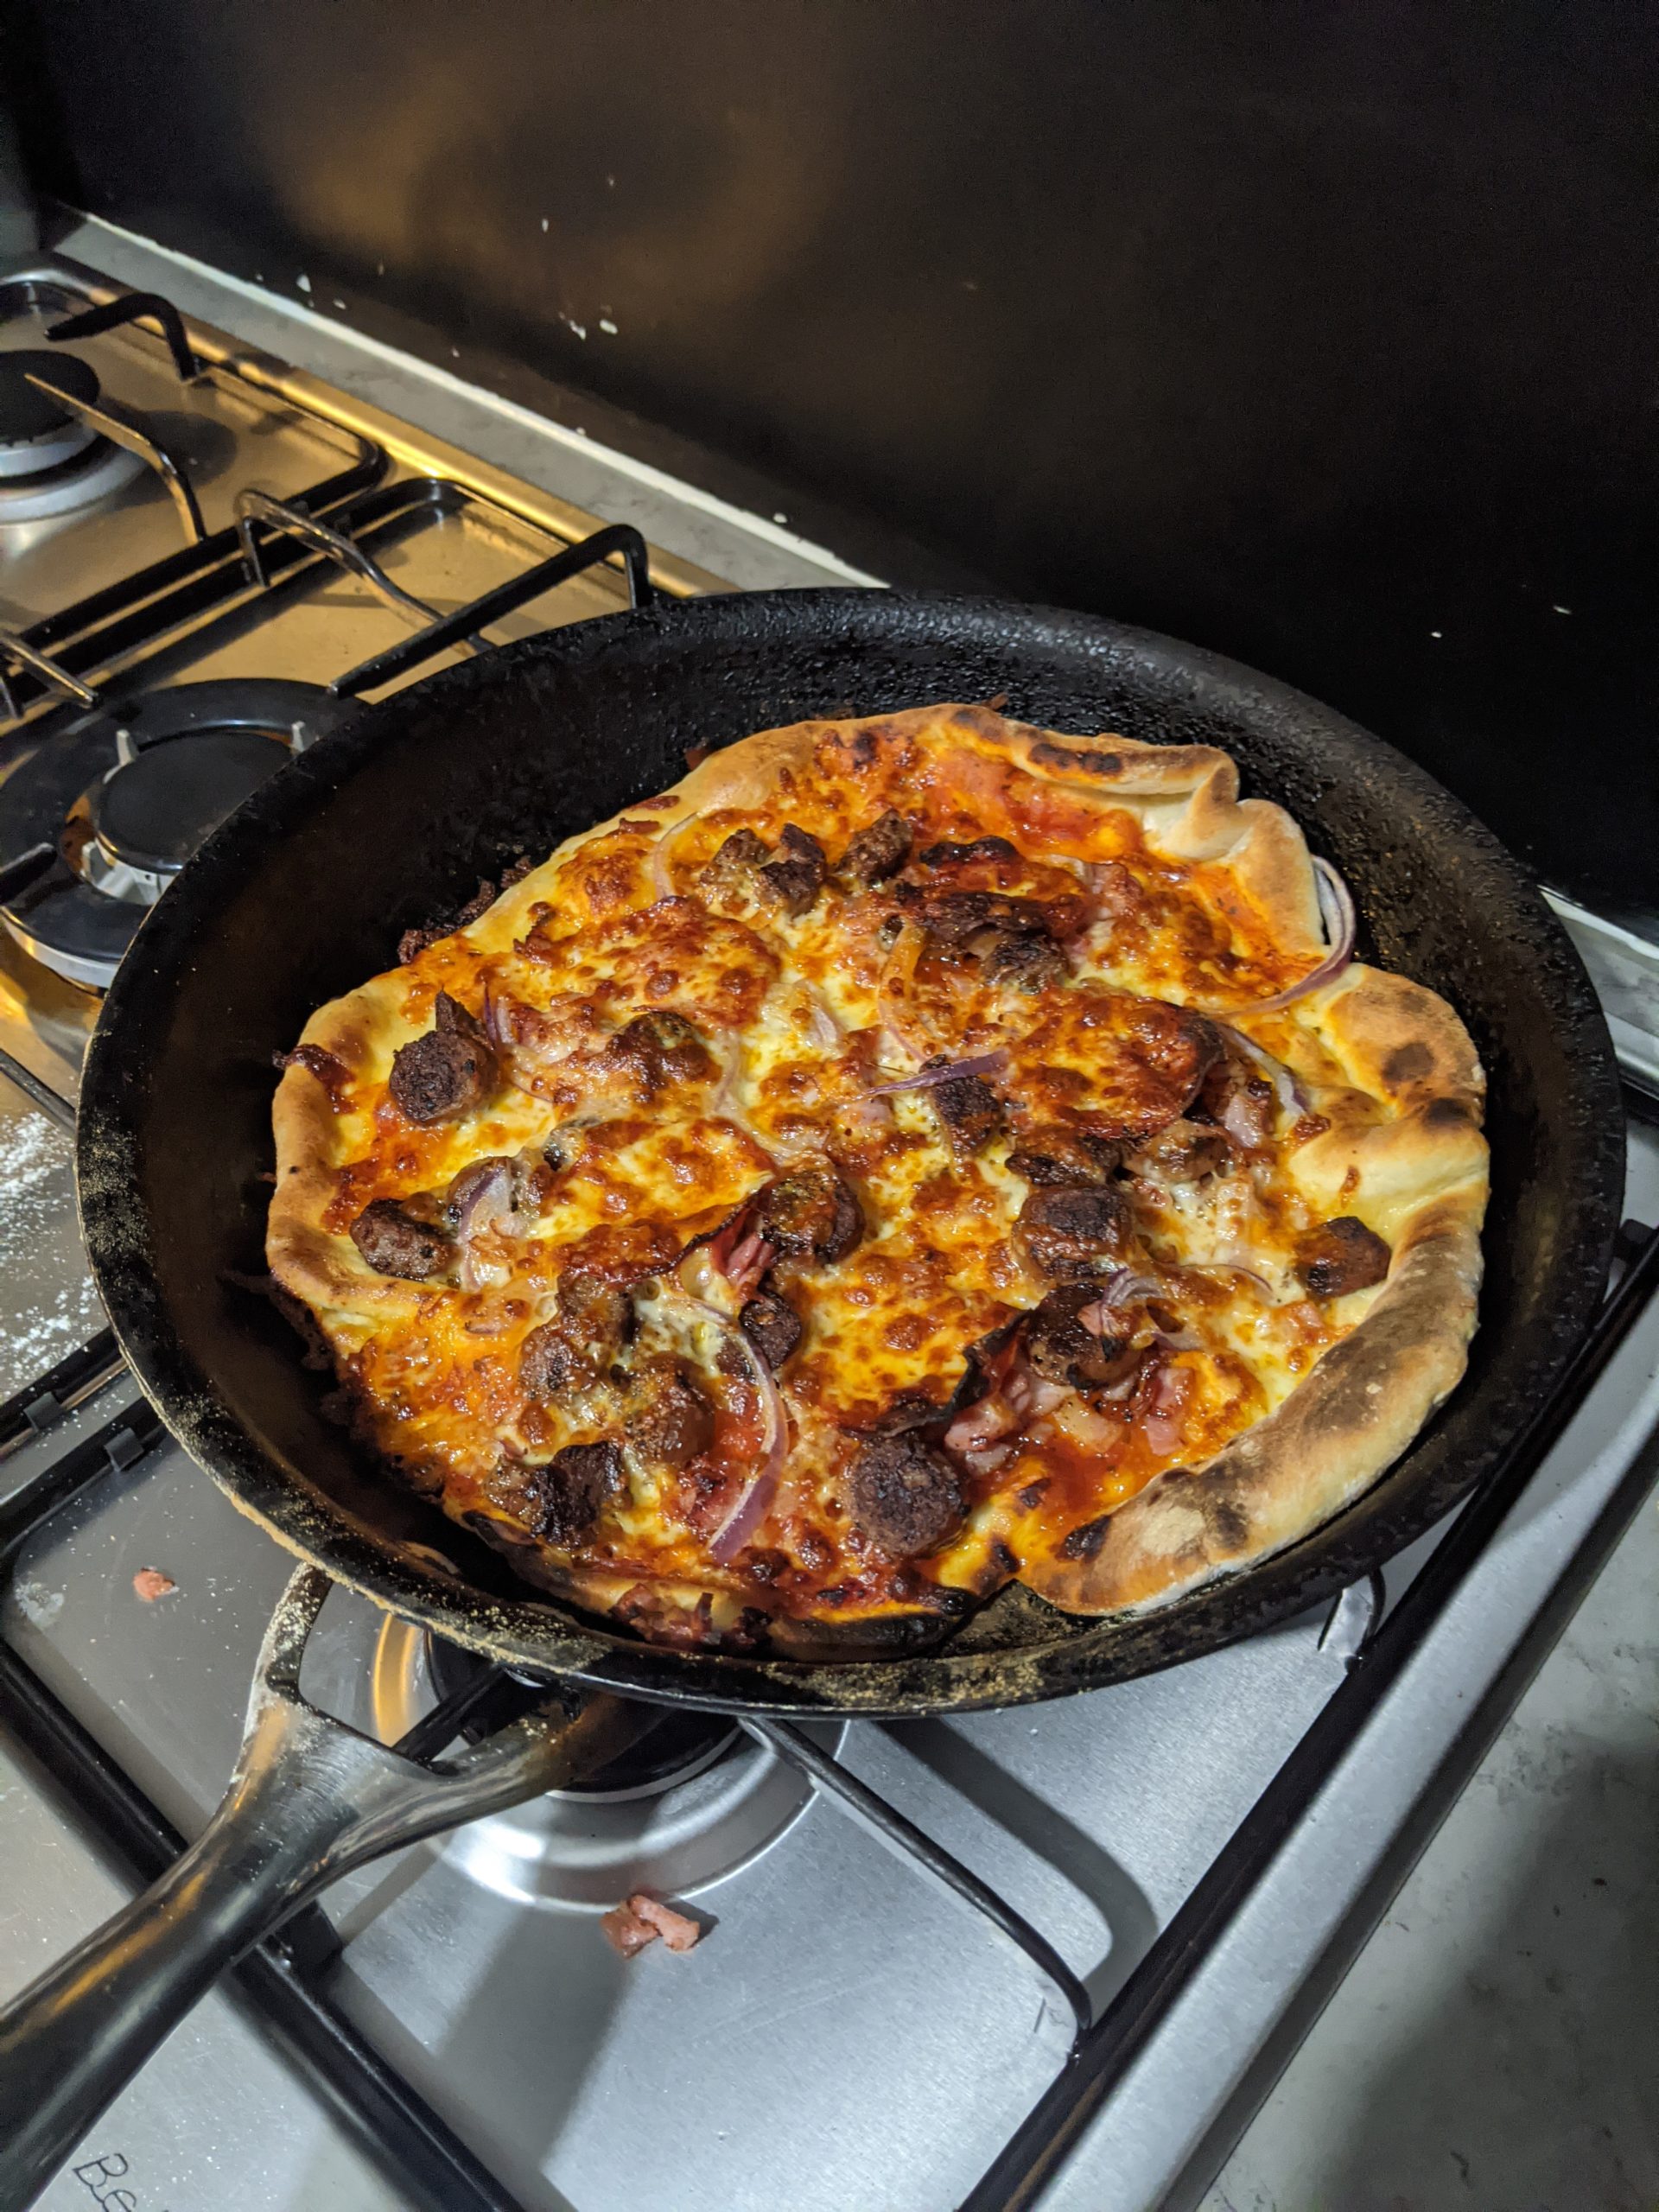 Pan cooked pizza 🍕 2